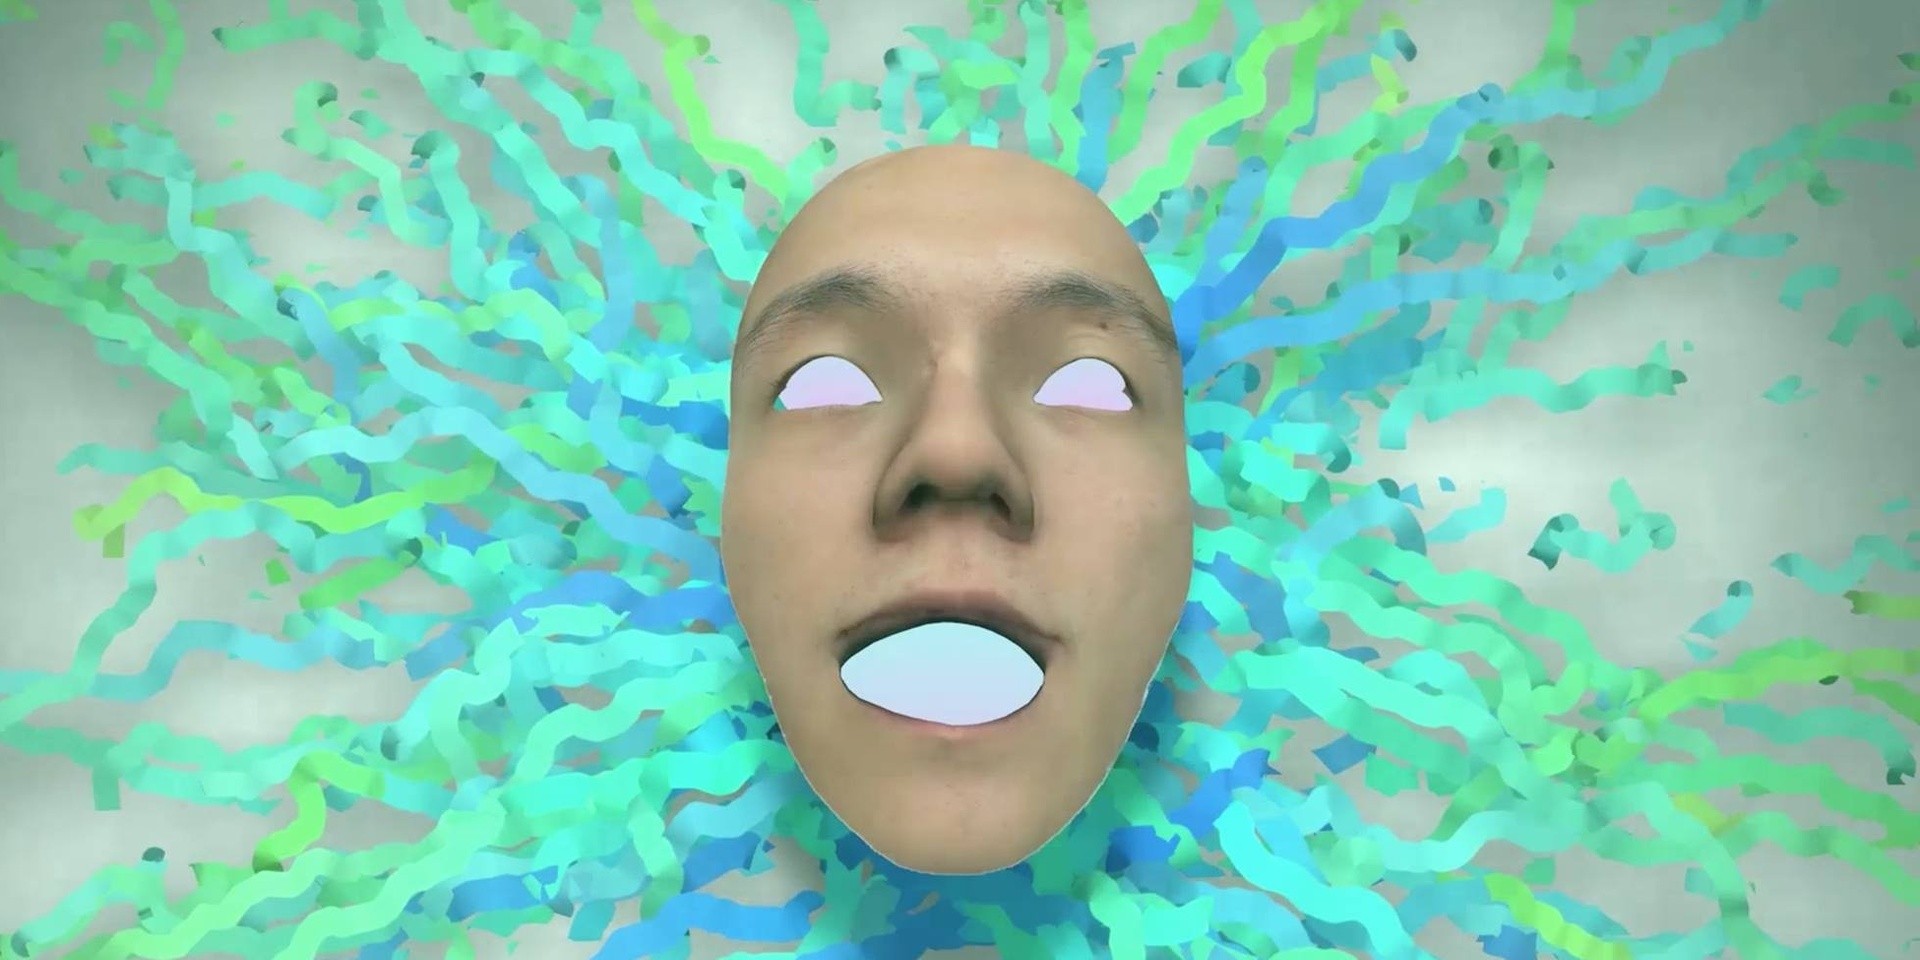 WATCH: Yllis explores a surreal, computer-generated universe in music video for 'wiik'